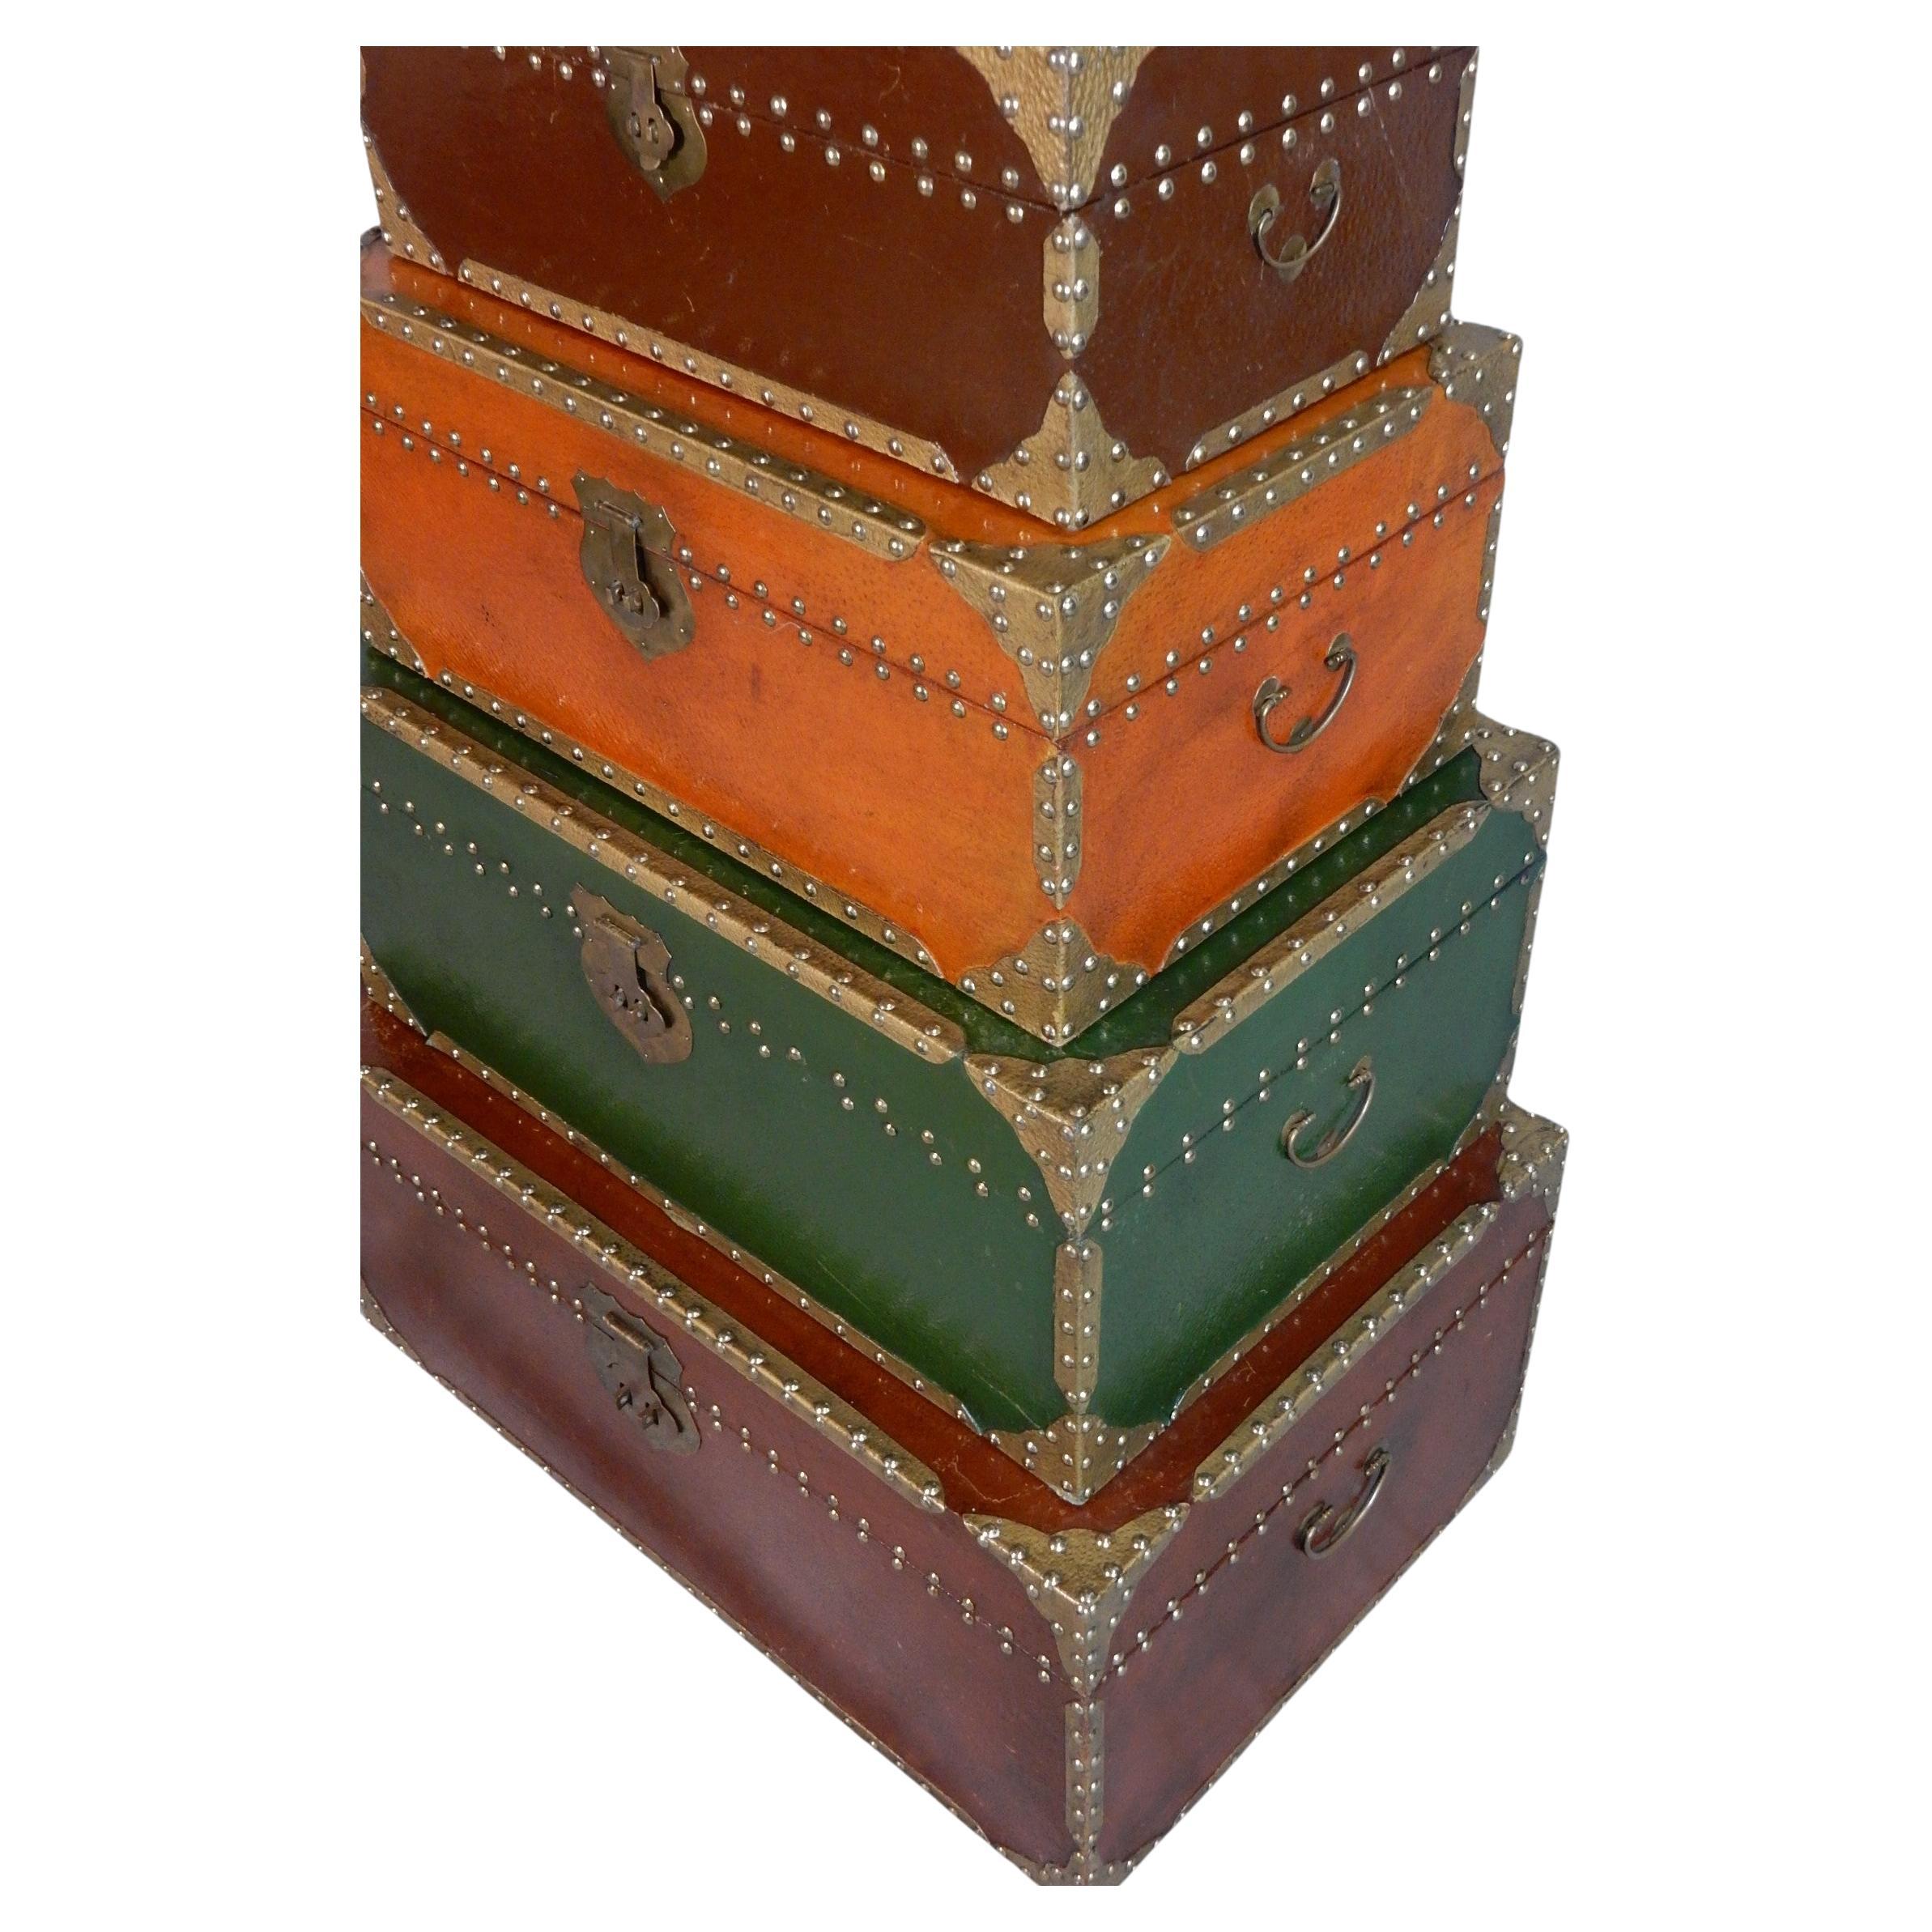 Exotic Brass Nail Head & Enameled Wood Nesting Trunks or Chests For Sale 3